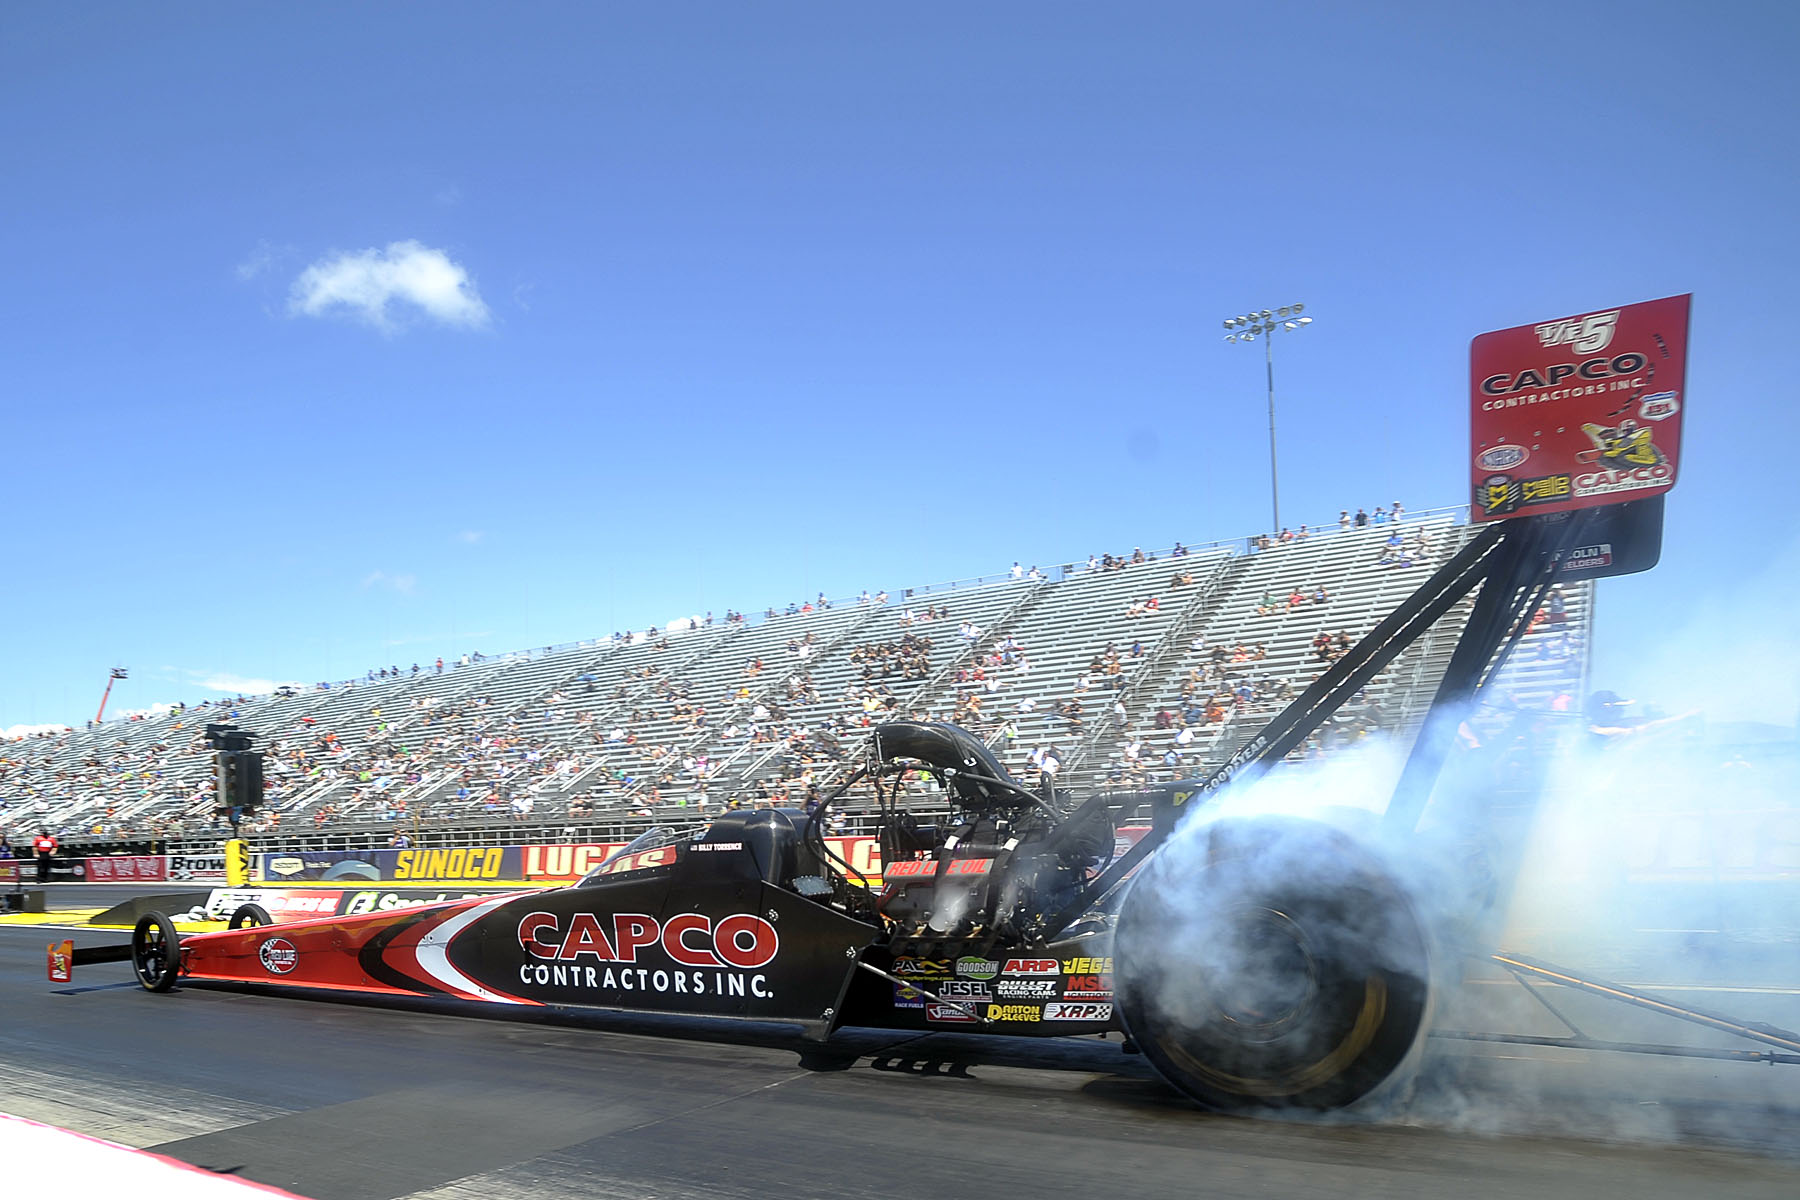 Billy Torrence, Matt Hagan Claim Nitro Wins As NHRA Roars Back To Life In Restart At Indy Drag Illustrated Drag Racing News, Opinion, Interviews, Photos, Videos and More picture